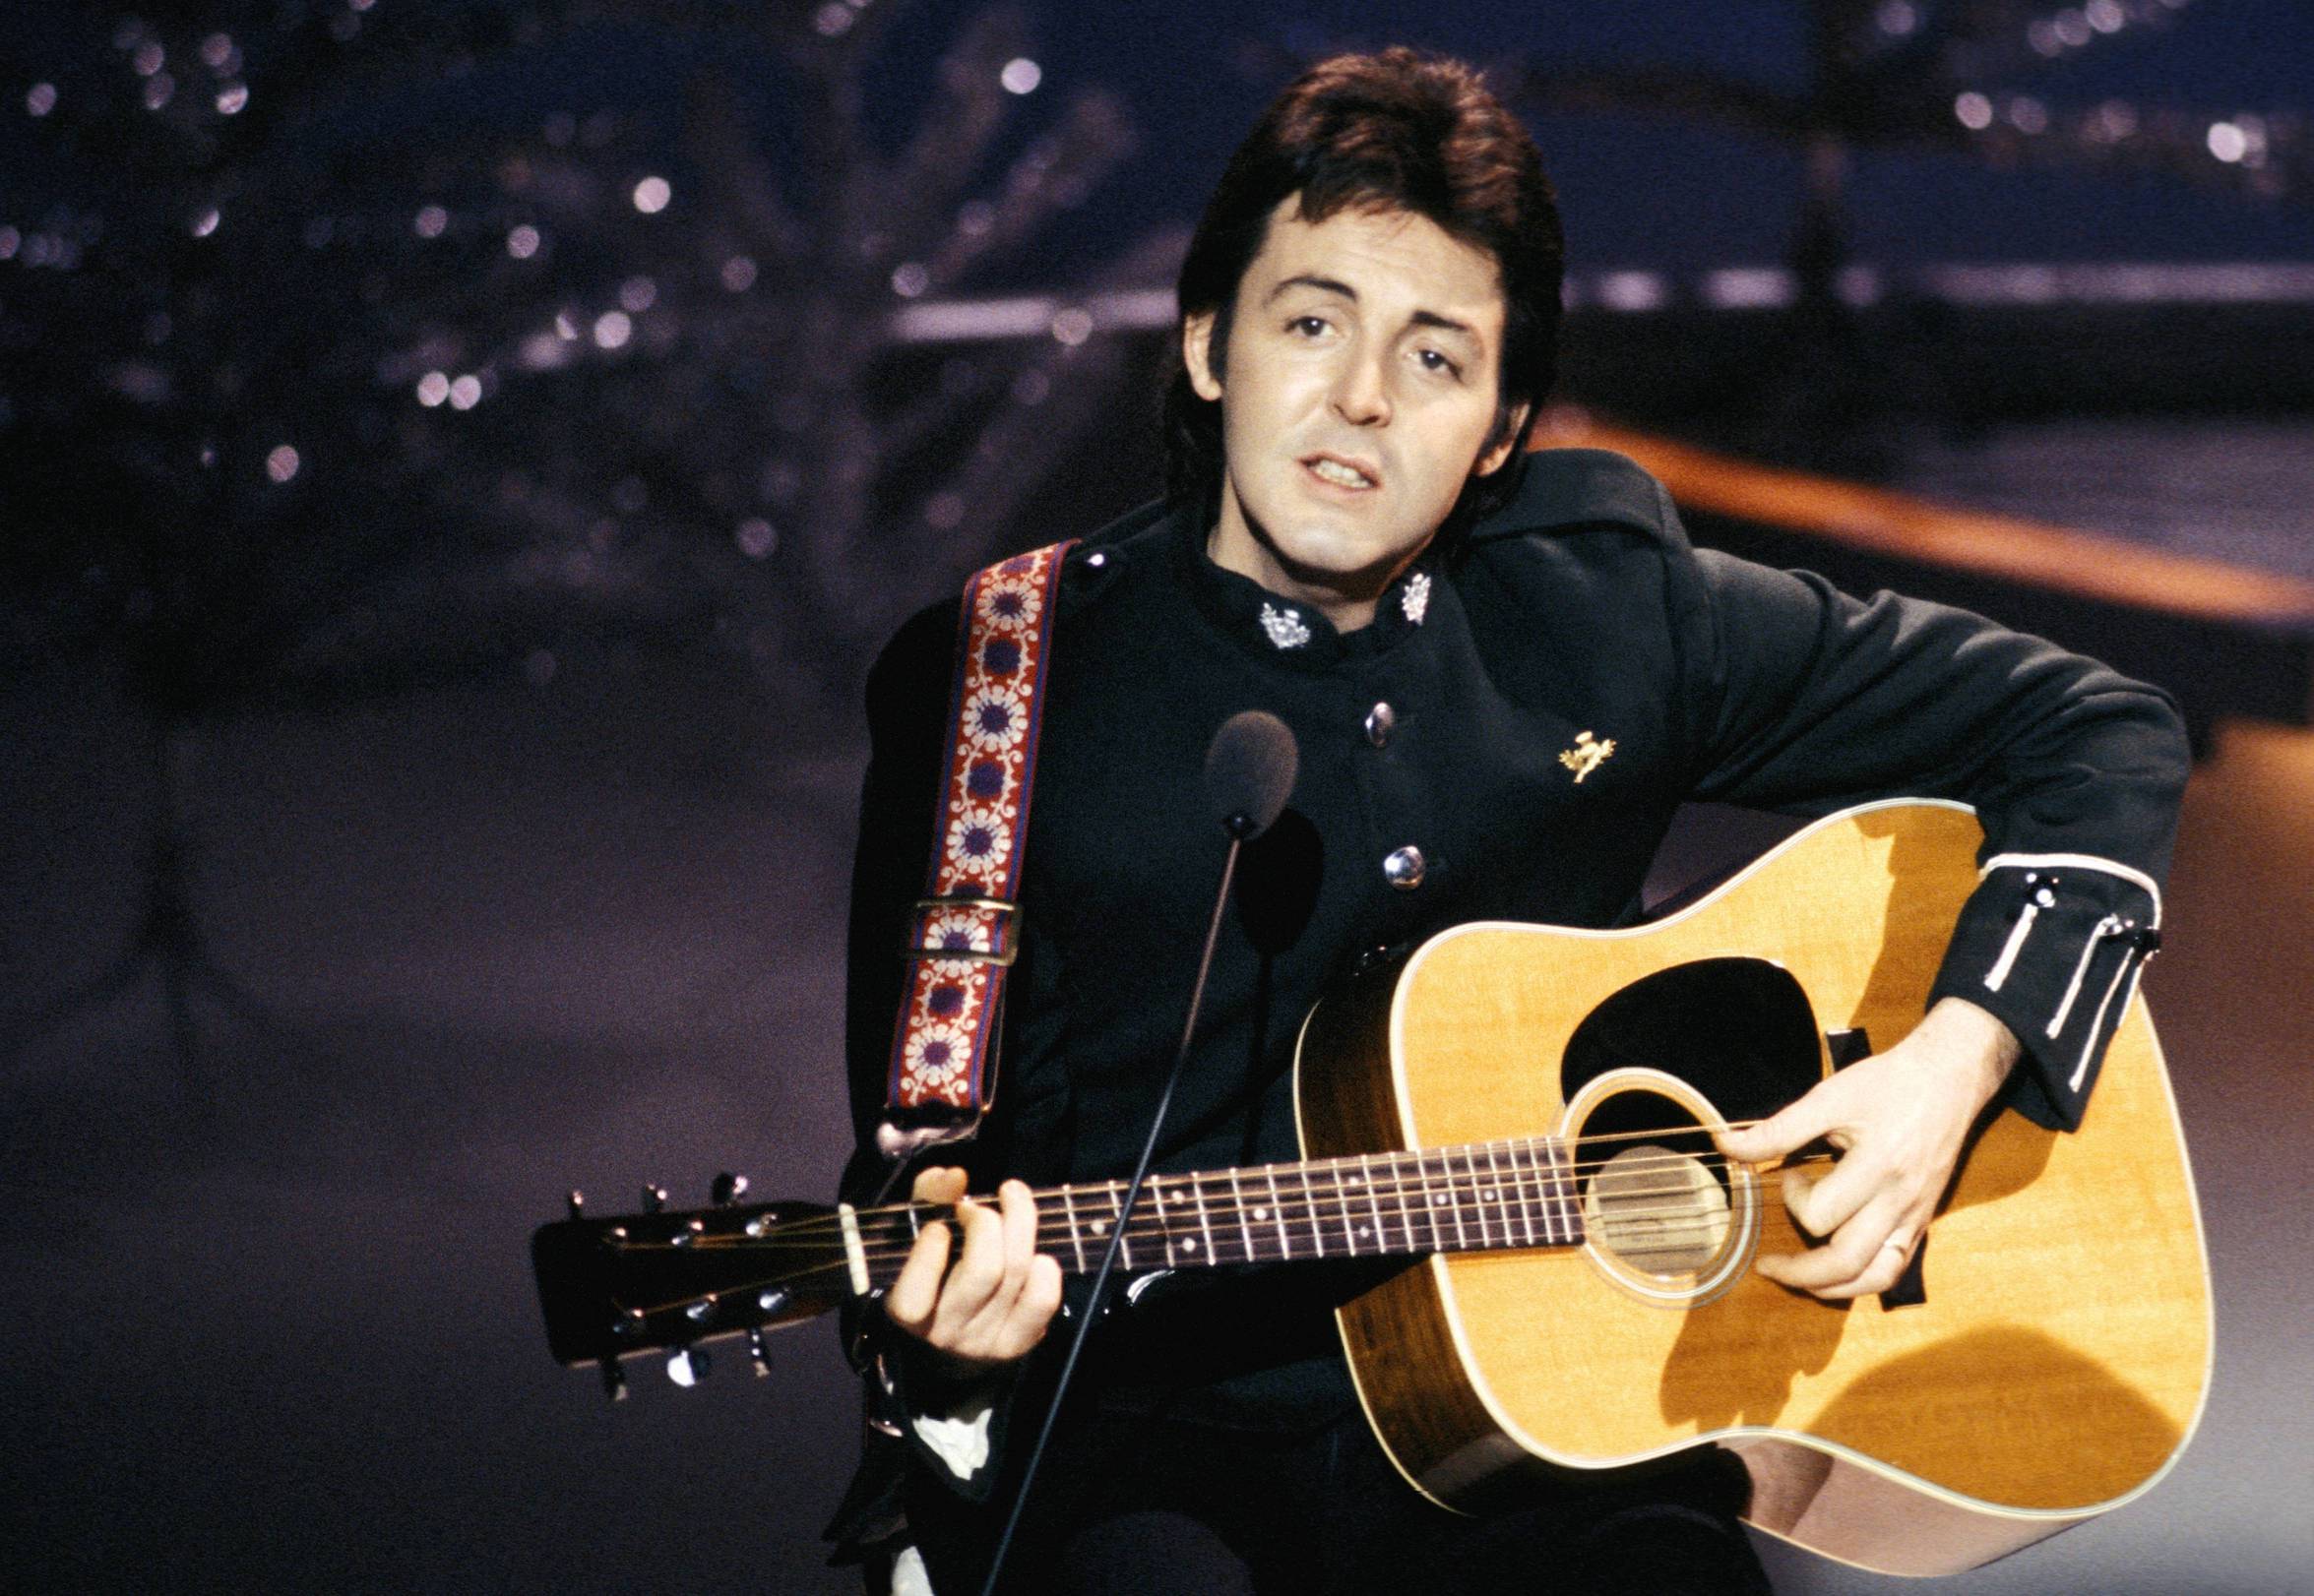 Paul McCartney and Wings perform on the Mike Yarwood Christmas Special